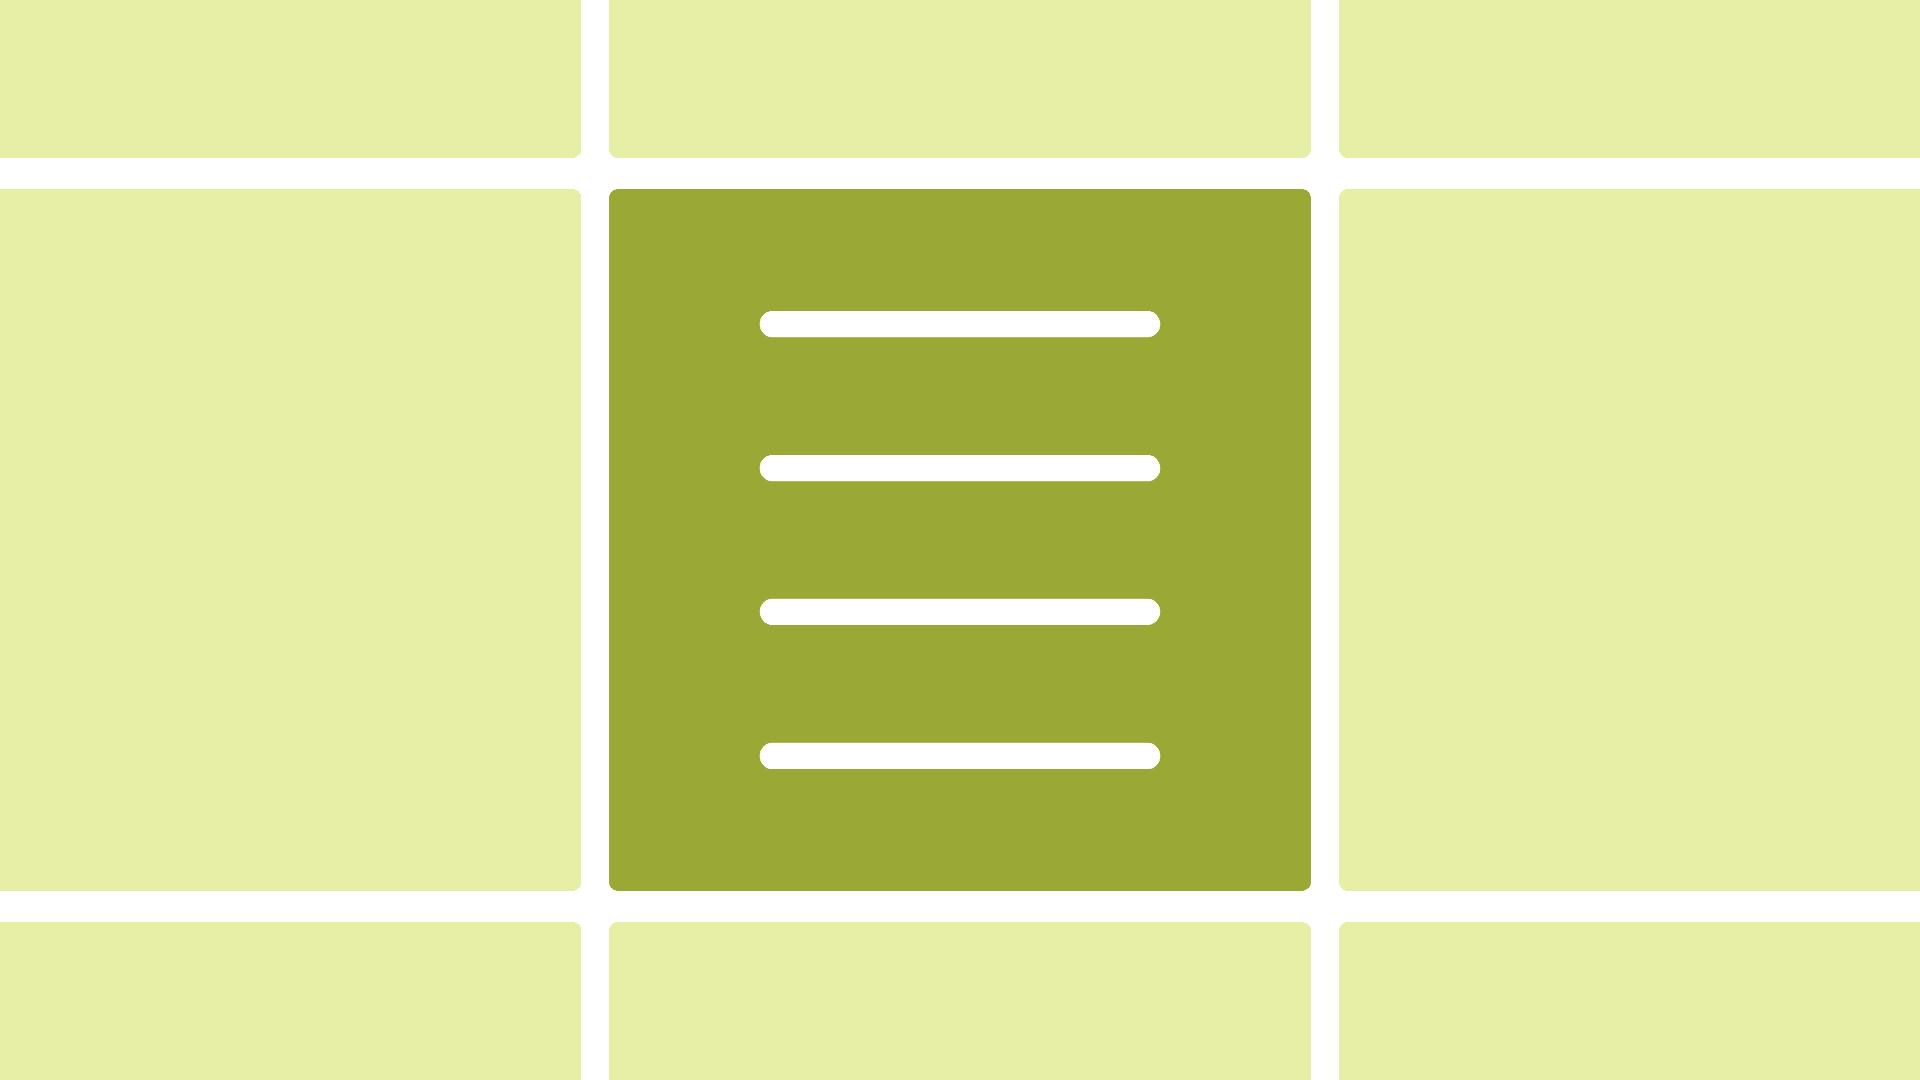 A green square with white text, demonstrating what 4 lines of 15 characters looks like.